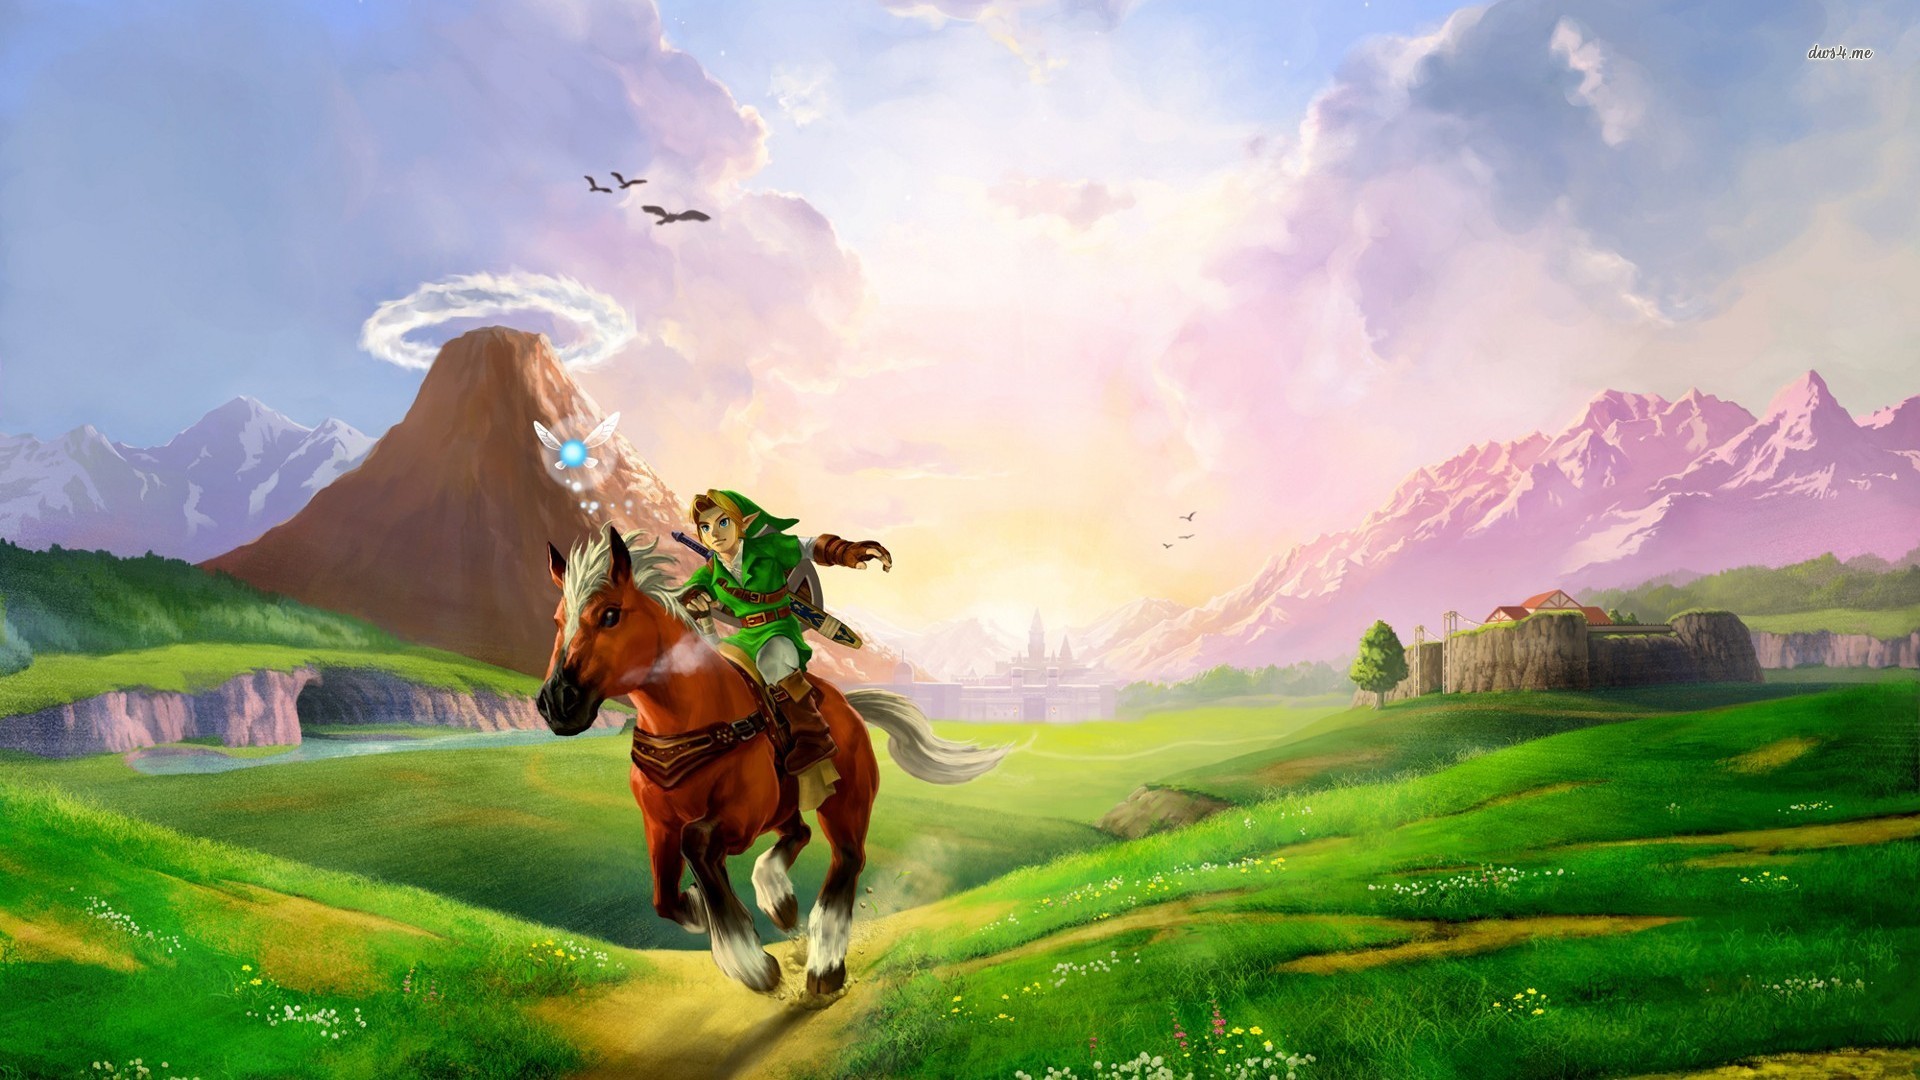 1920x1080 High Quality Legend Of Zelda Wallpapers | Full HD Pictures